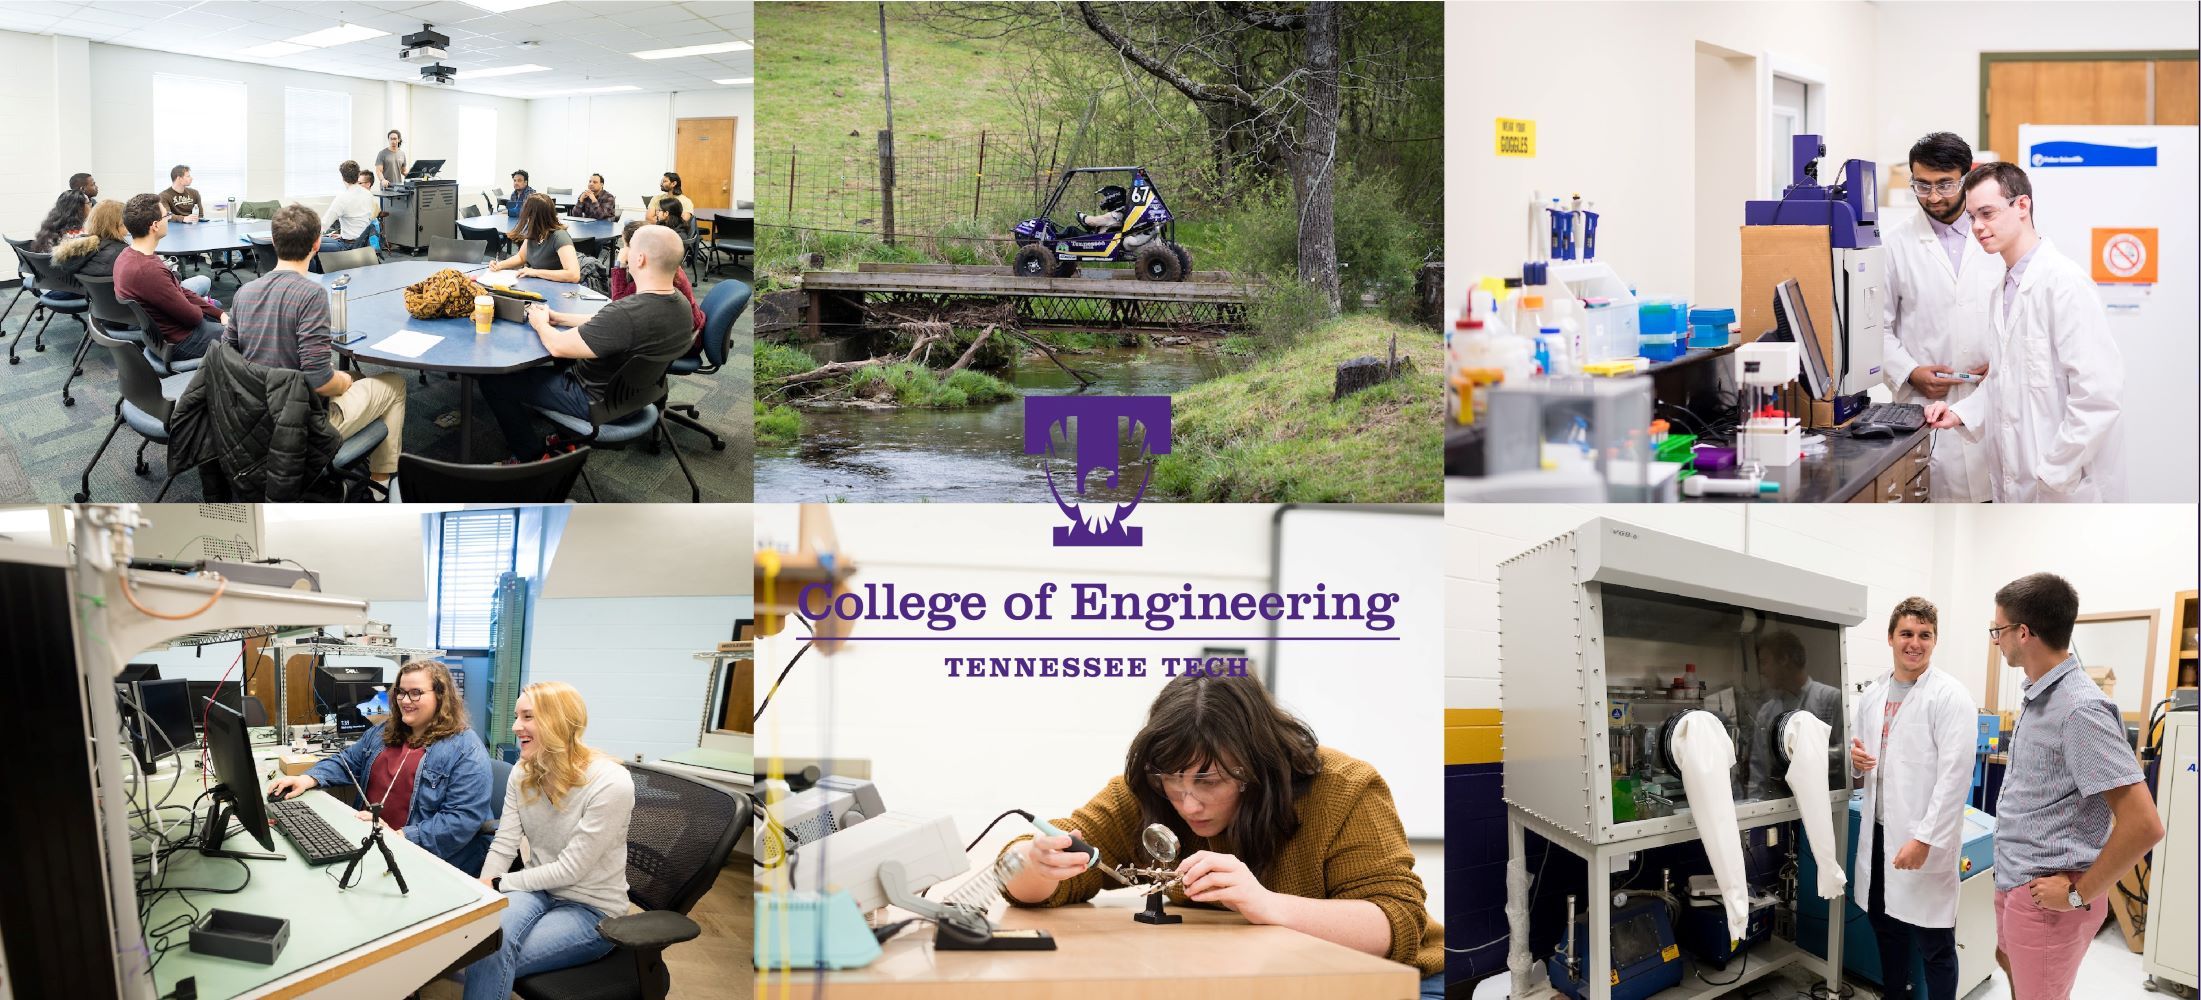 A collage of photos of engineering students in labs and classrooms.